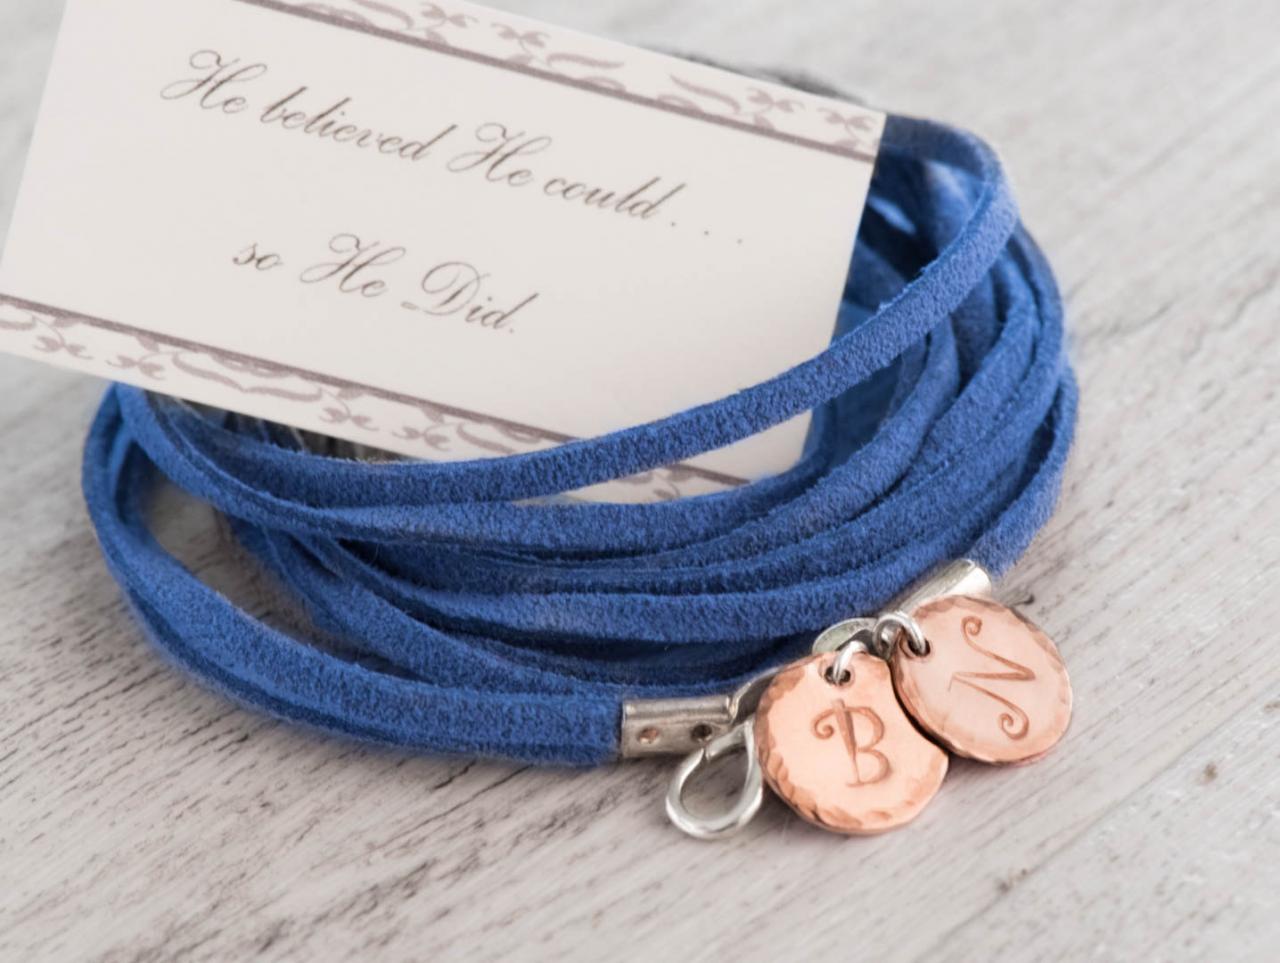 Custom engraved initial men bracelet, man birthday gift for dad from daughter, personalized fathers day jewelry with multi strand leather bracelet men, blue suede wrap bracelet.